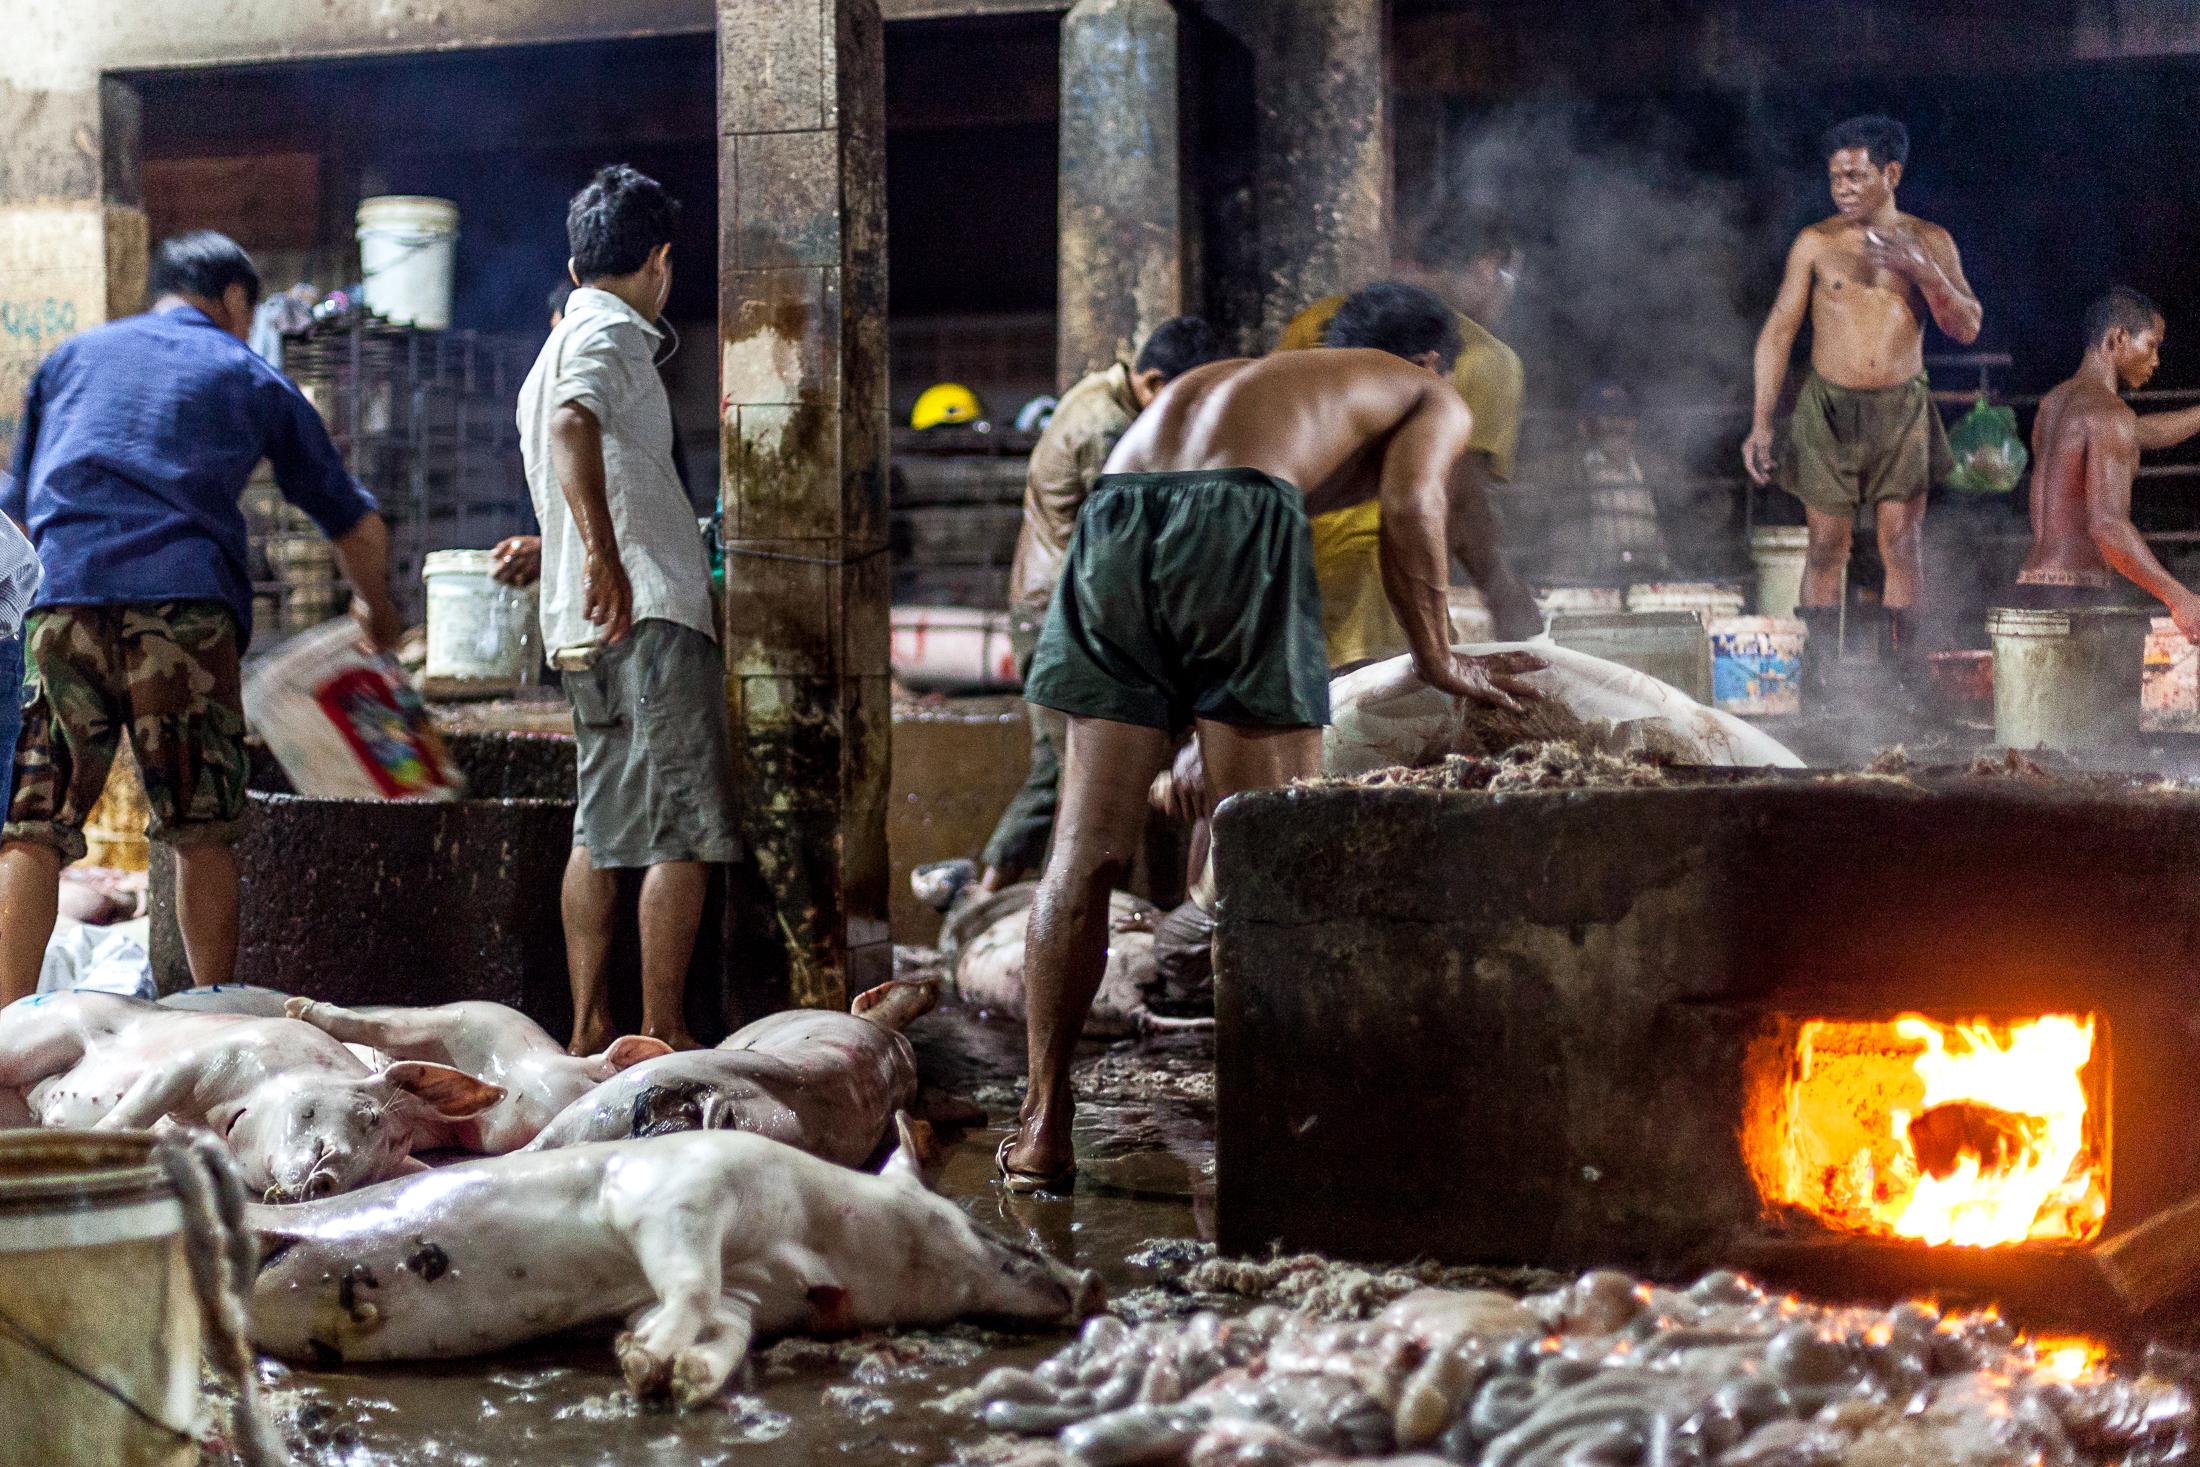 Inside a Cambodian Slaughterhouse - SIEM REAP, CAMBODIA - FEBRUARY 22: A group of workers...